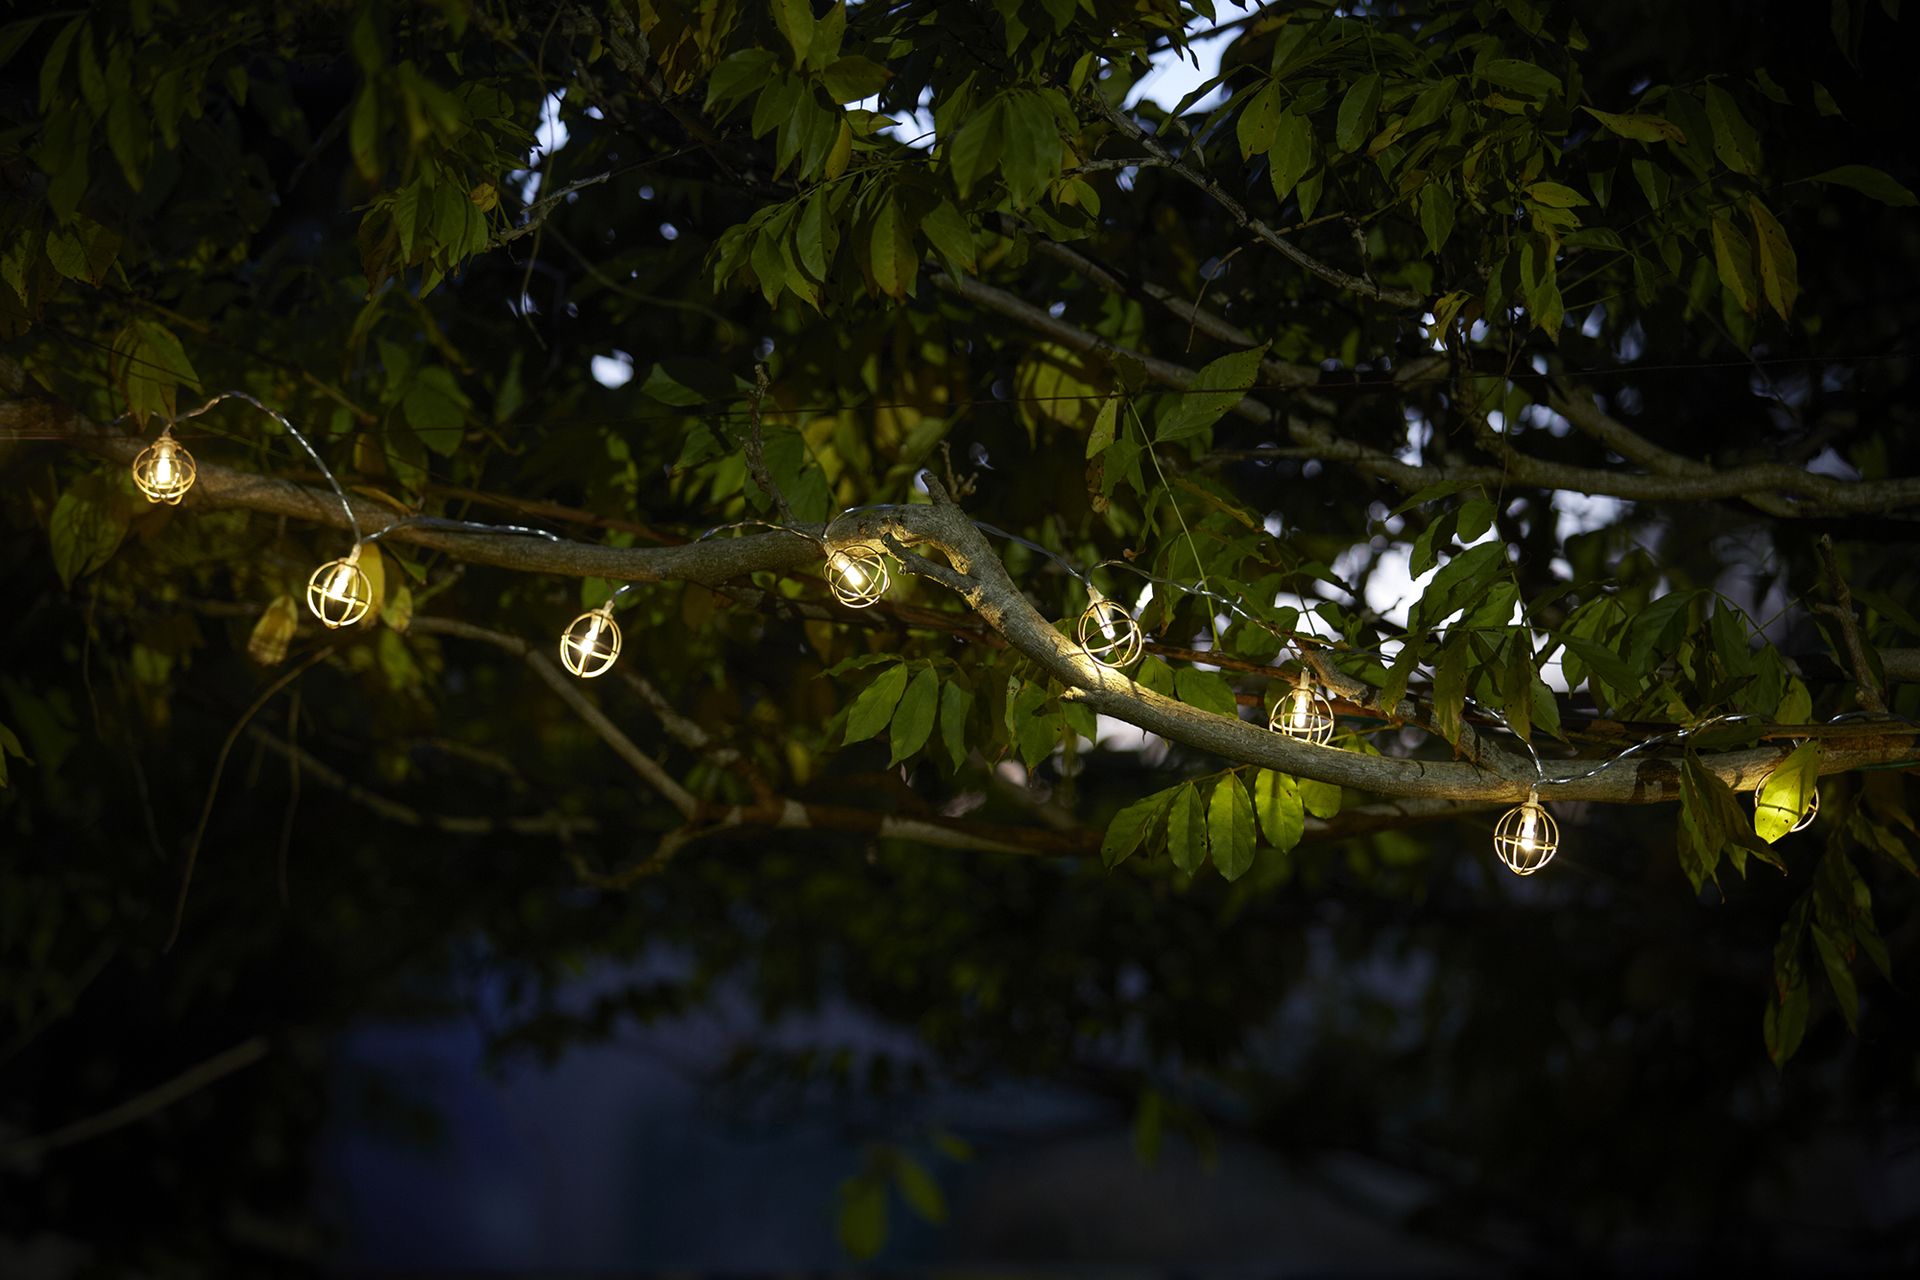 Outdoor string lighting ideas: 15 ways to light your yard